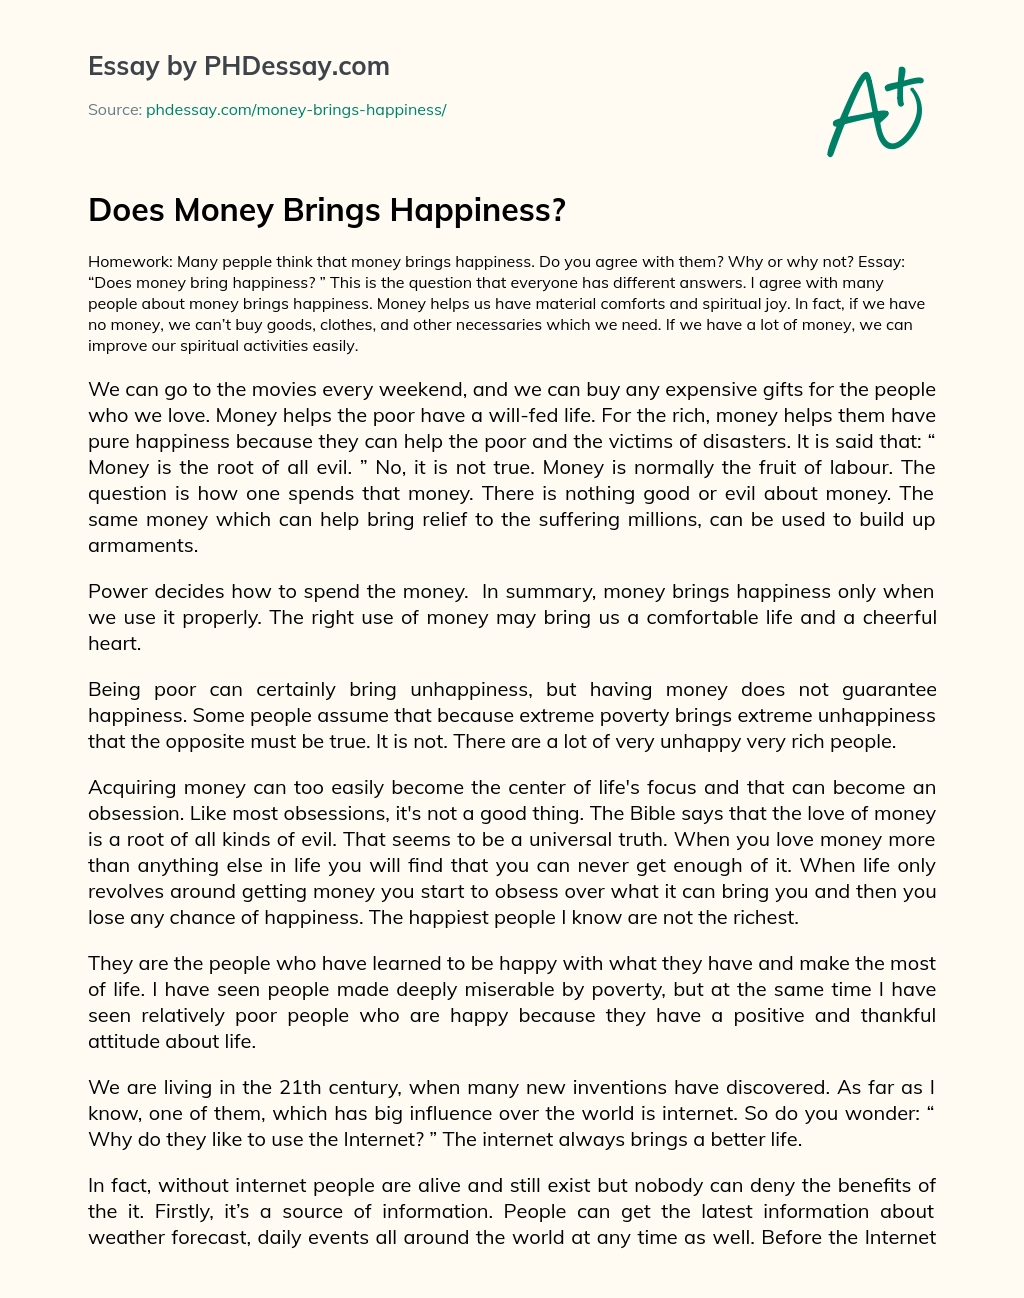 Does Money Brings Happiness? essay